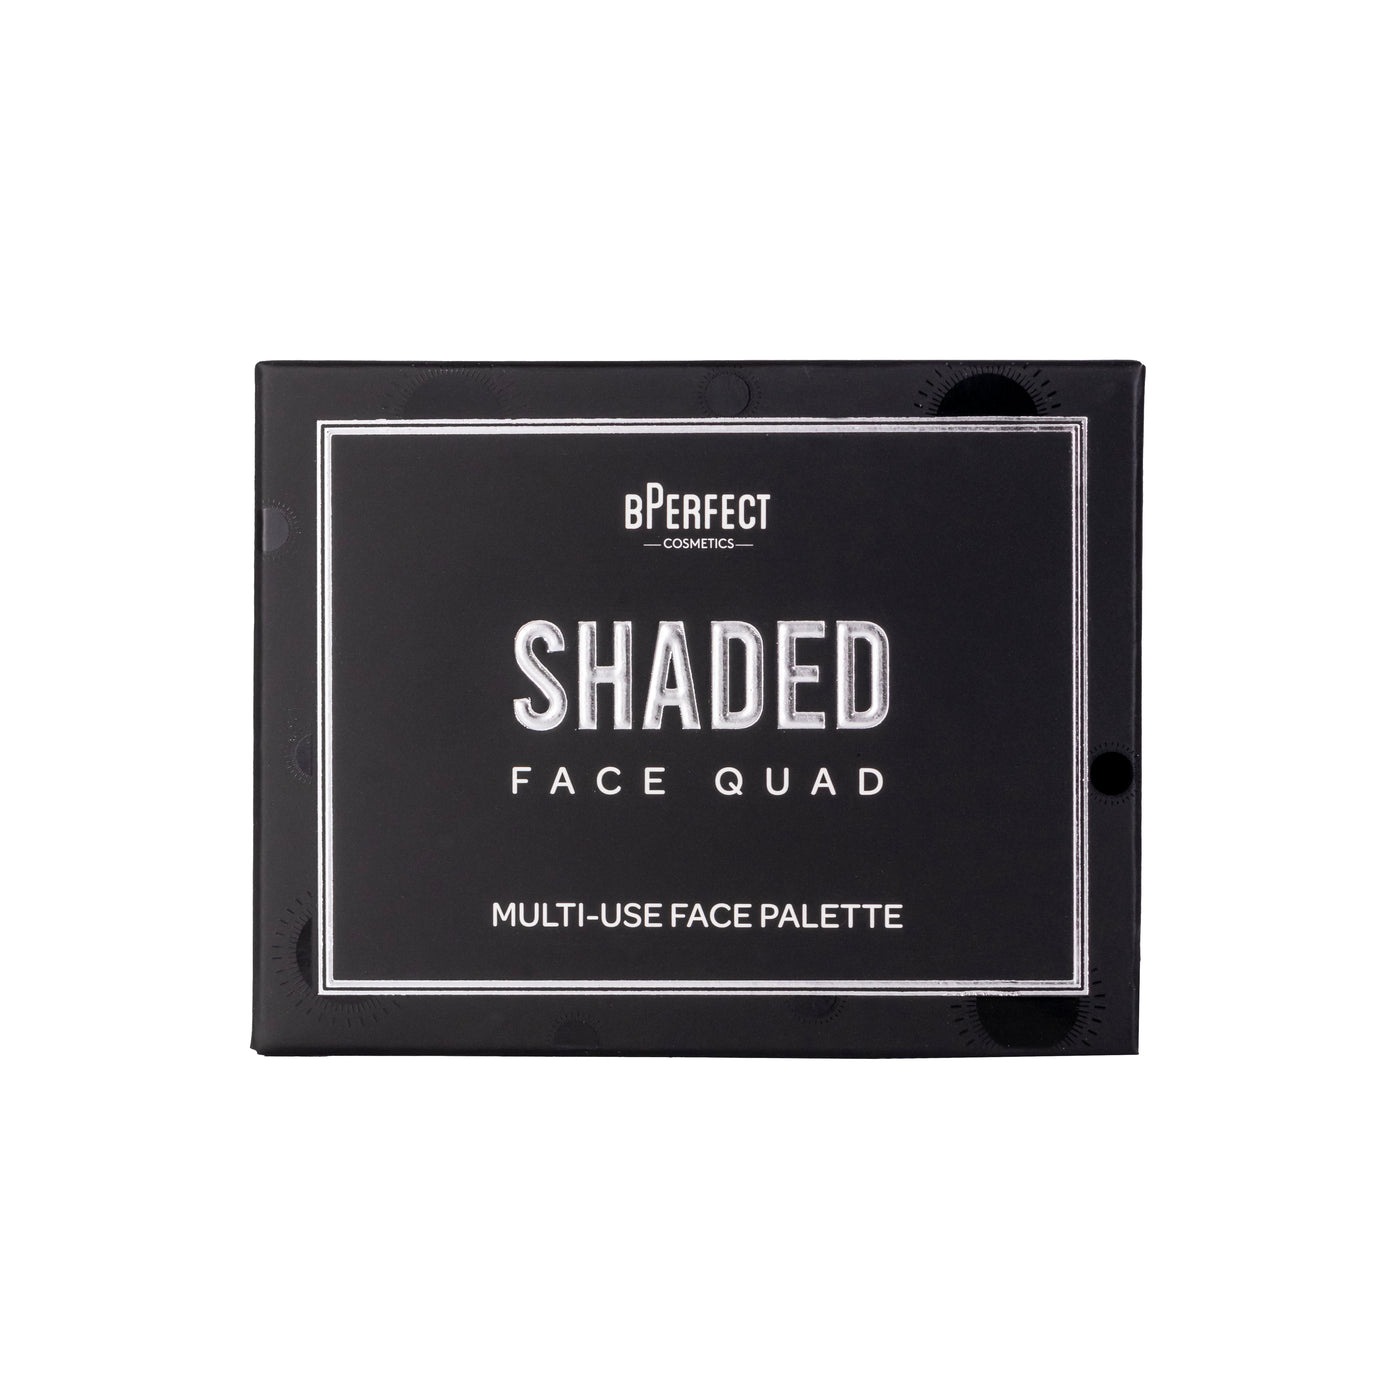 Shaded - Face Quad Palette